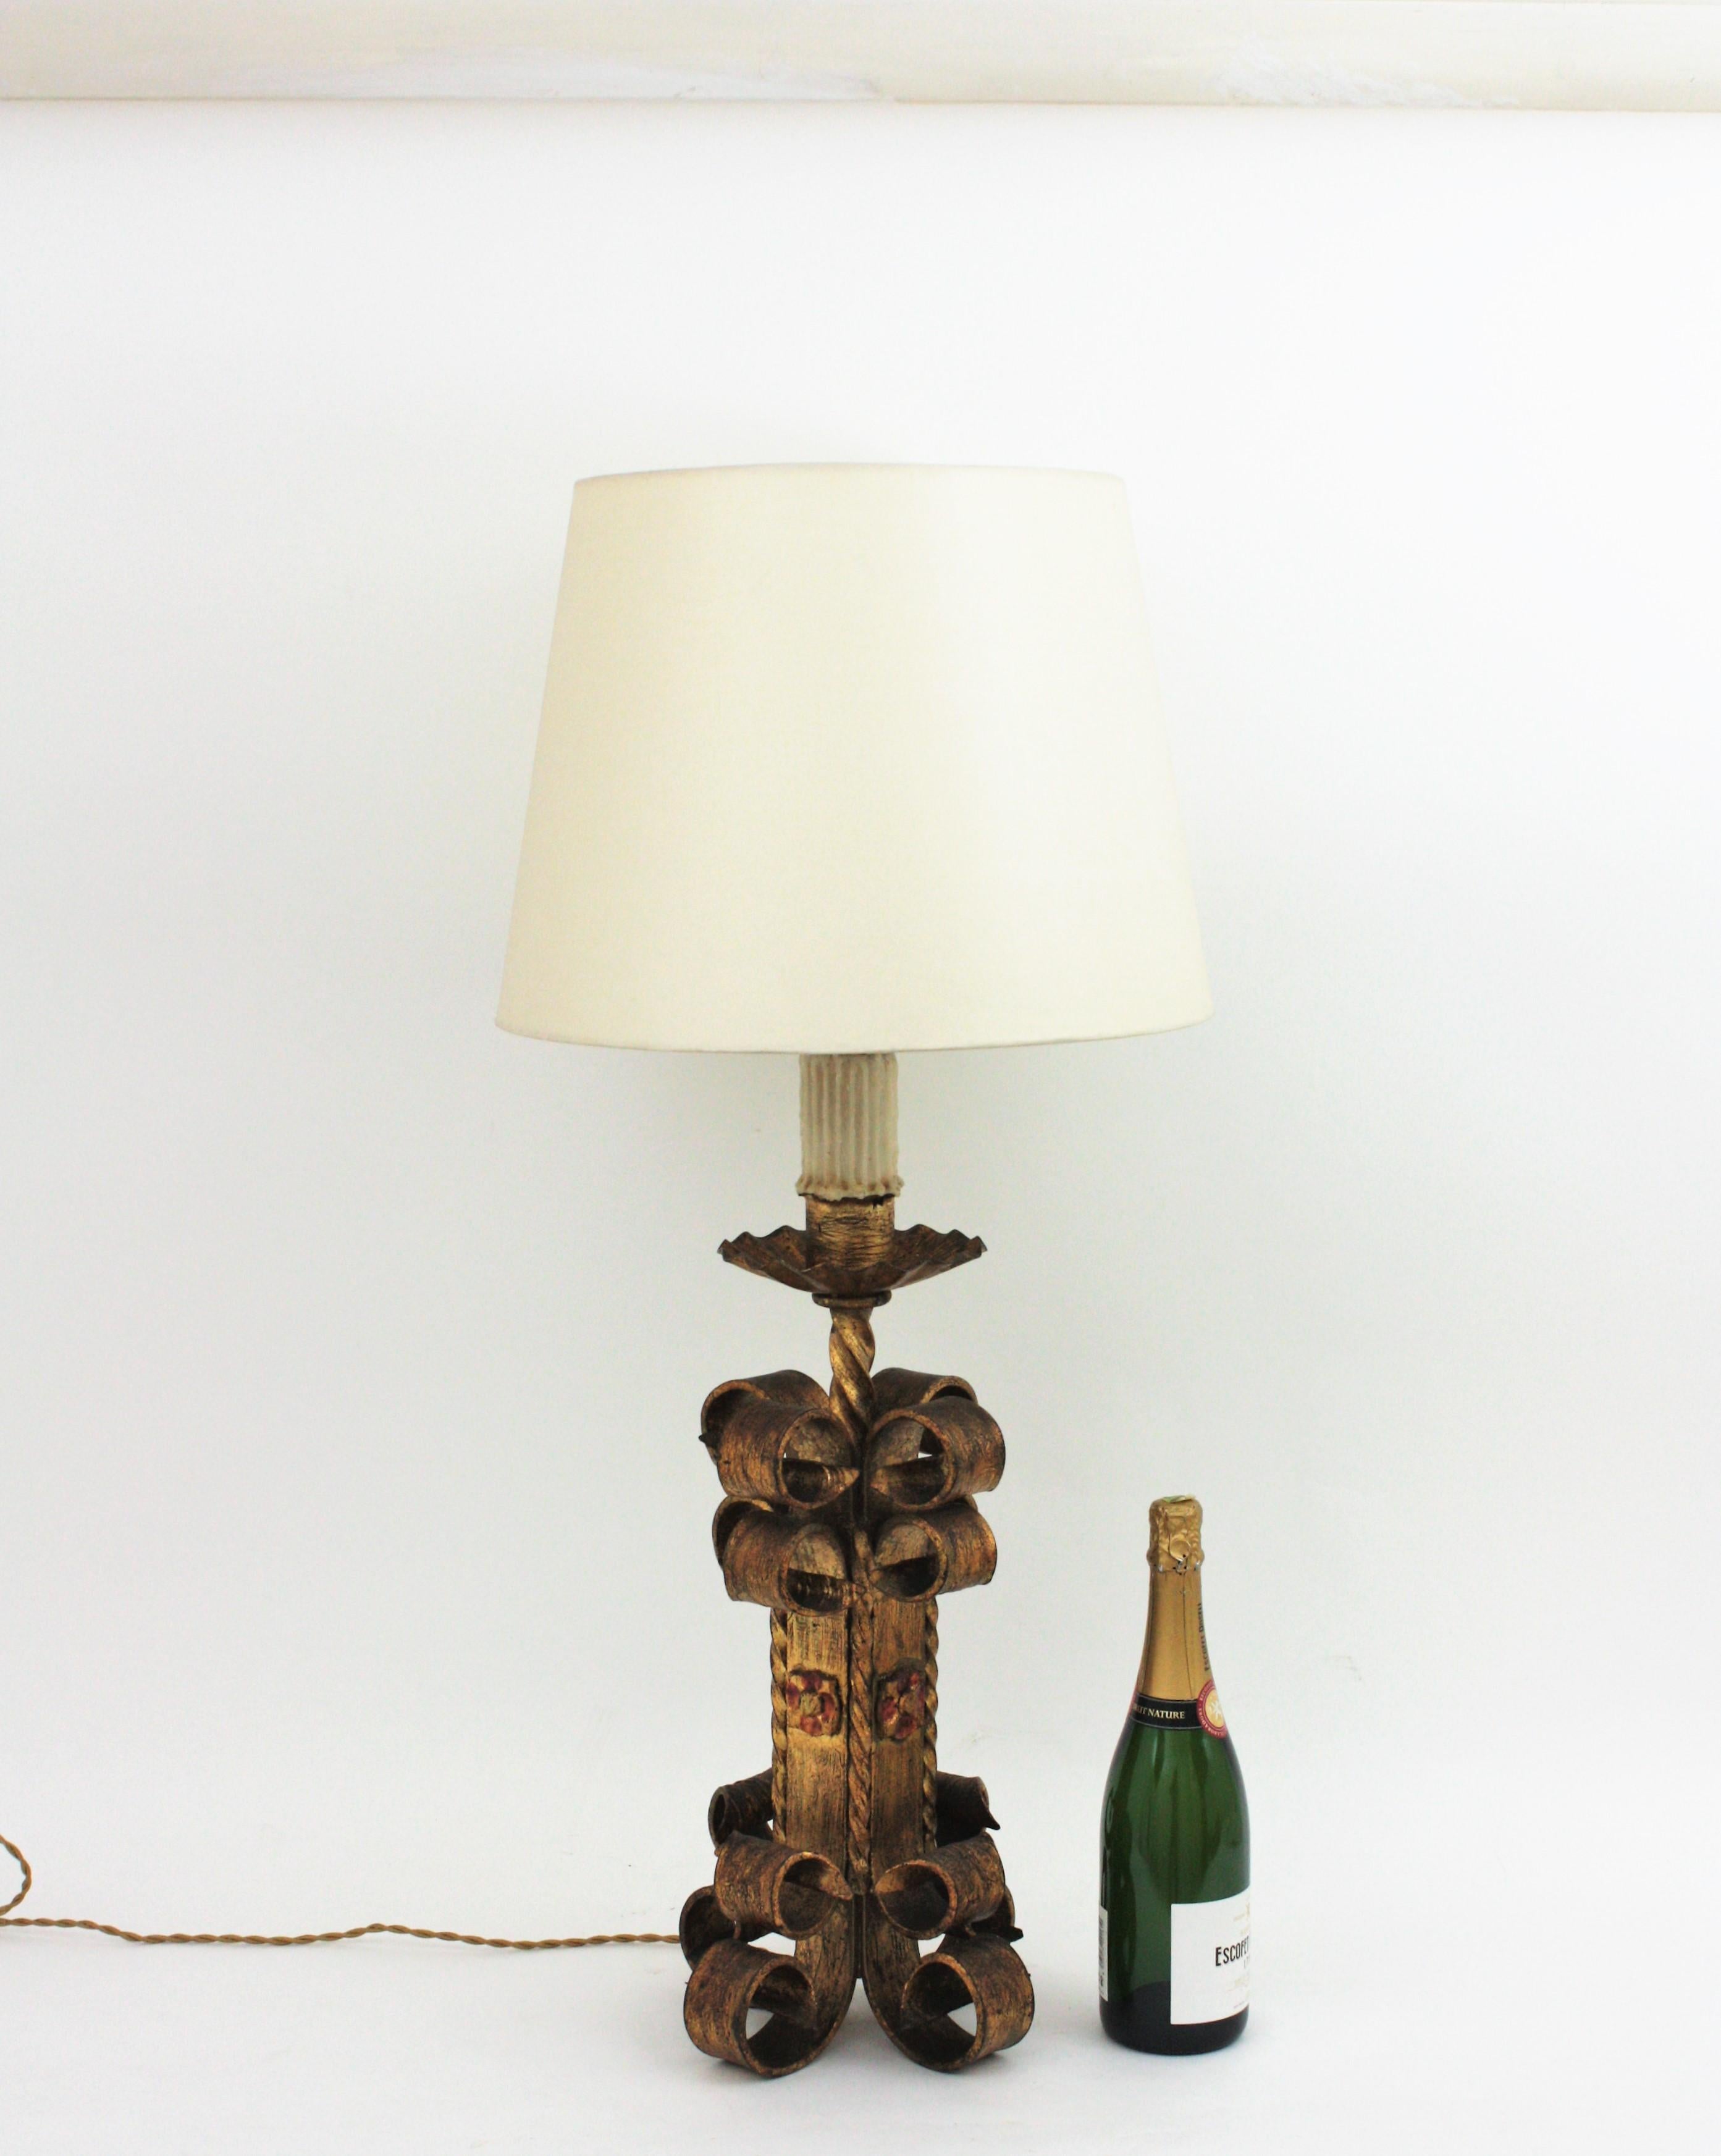 Spanish Revival Scrollwork Table Lamp in Gilt Wrought Iron, 1940s For Sale 7